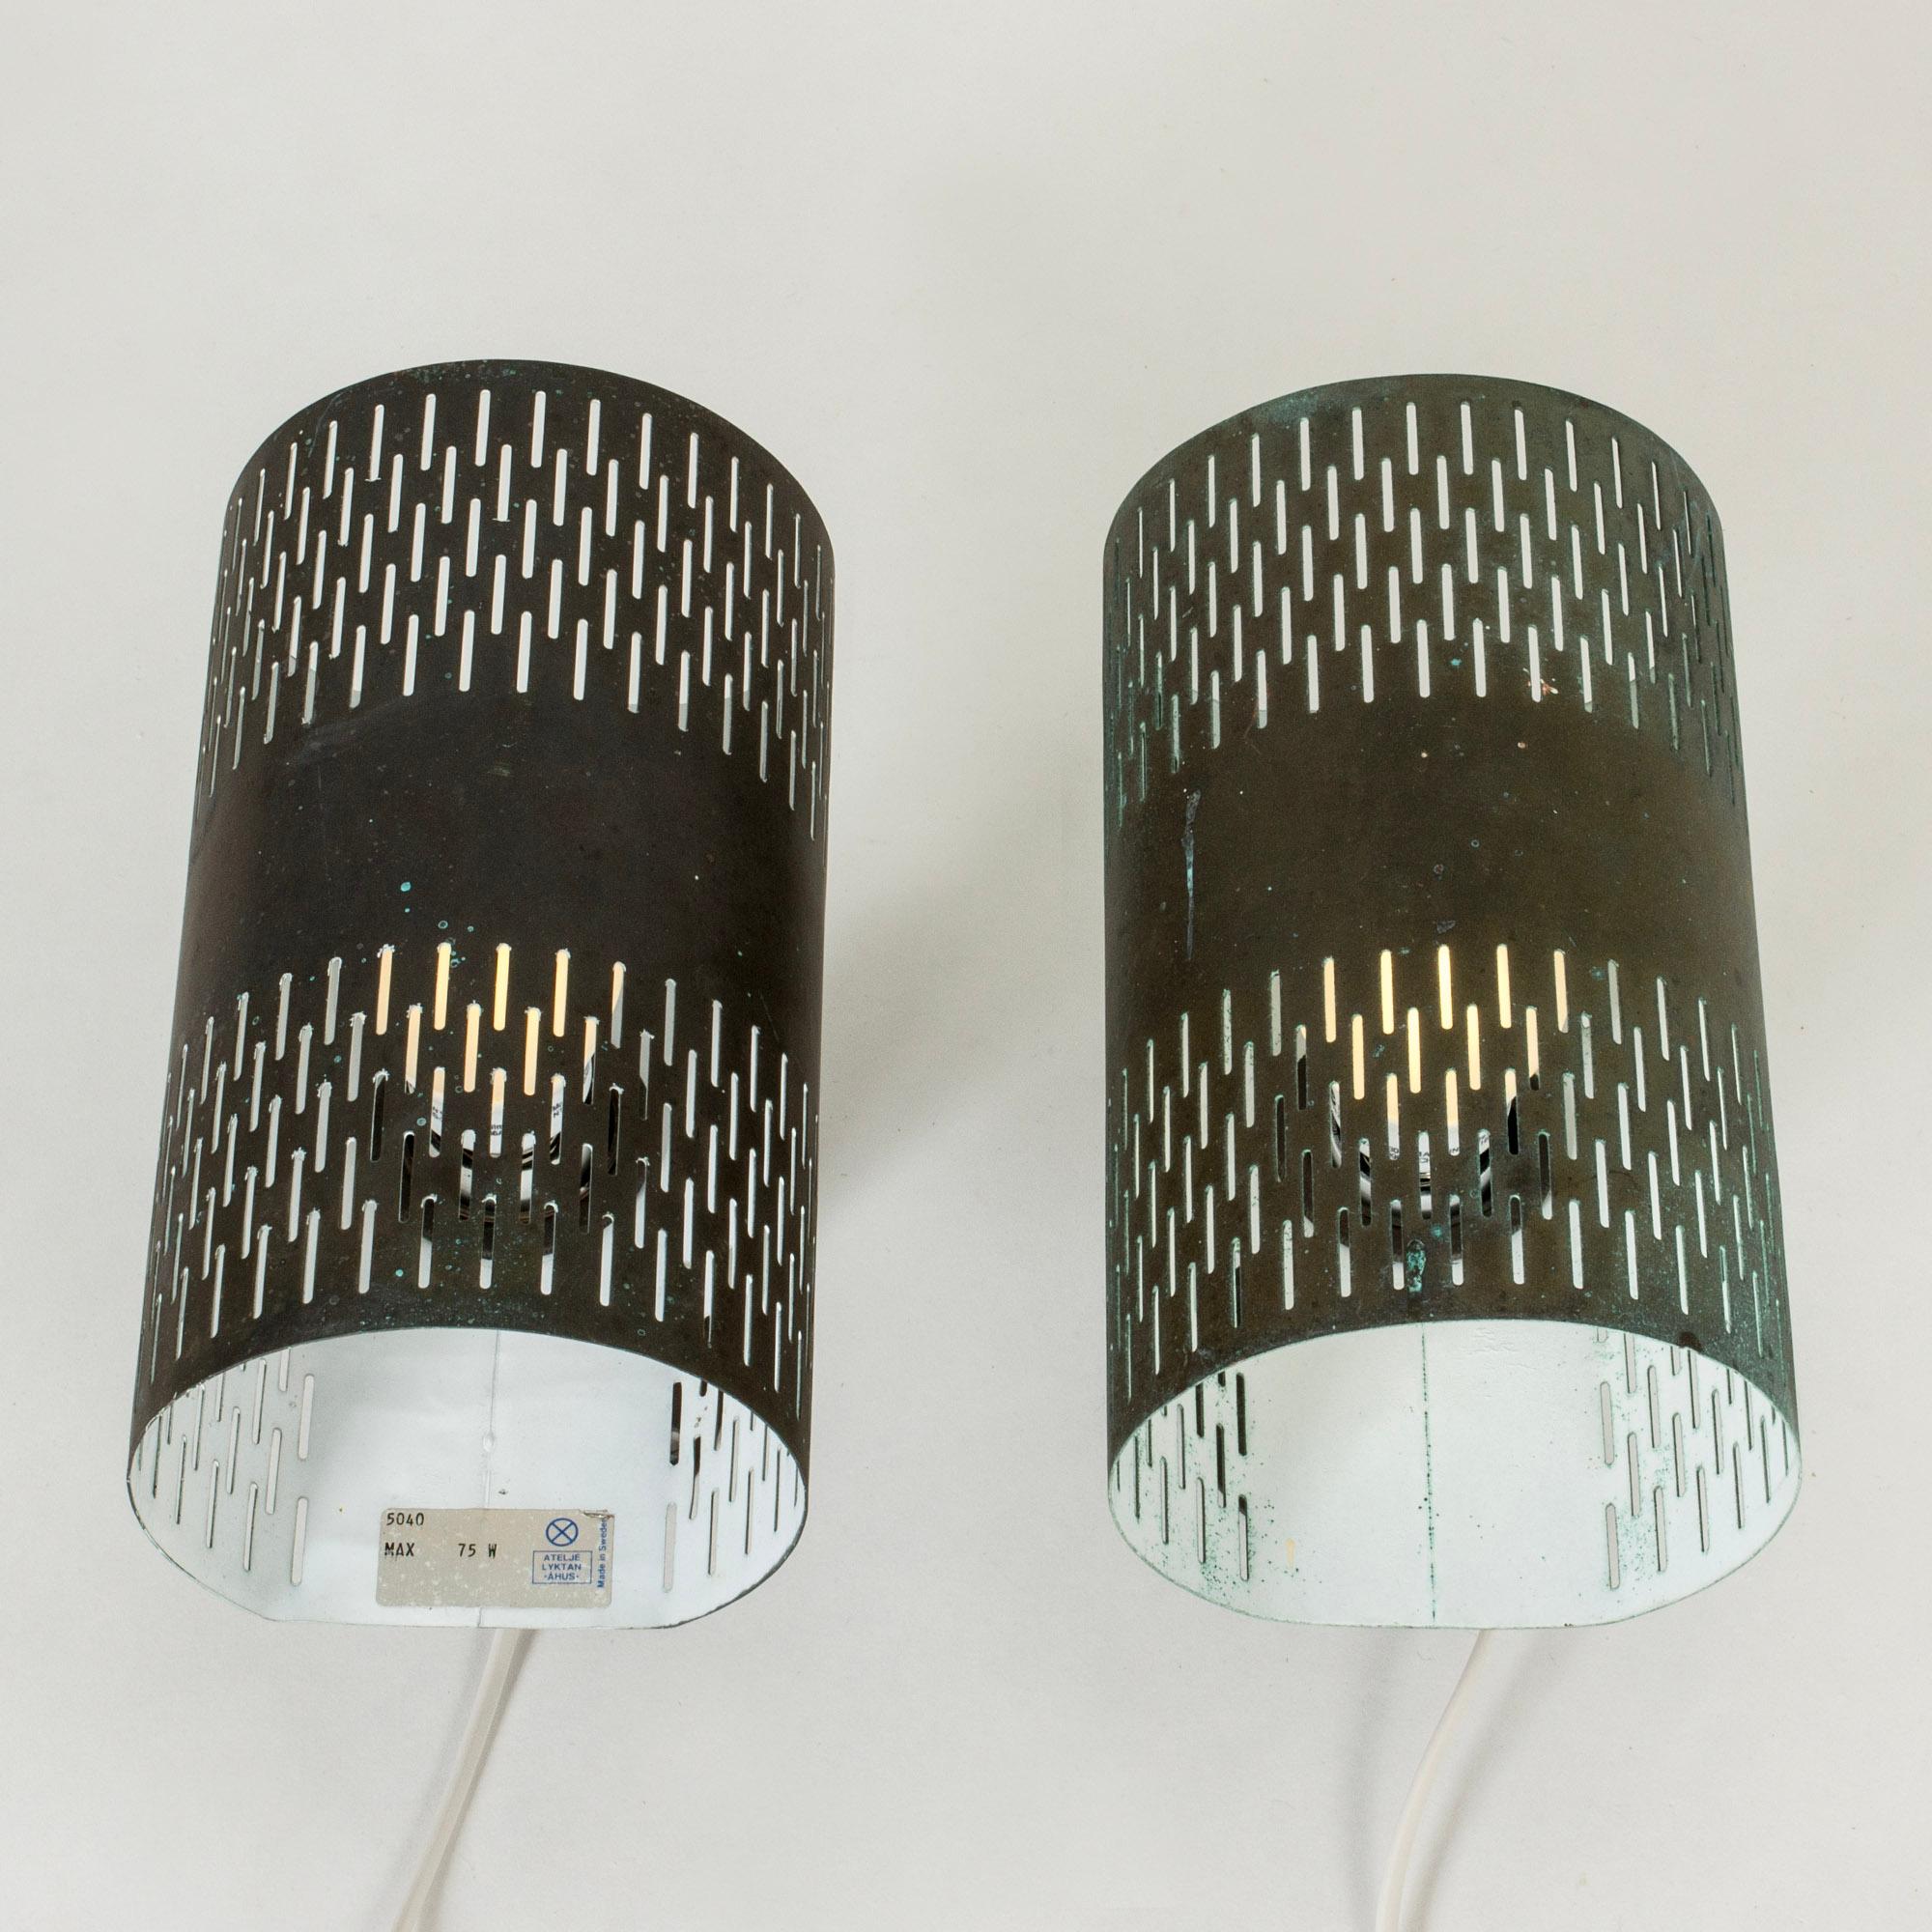 Very cool pair of wall lights by Hans Bergström, made from copper. Cylinder forms with a cutout graphic pattern.

Rewired but need to be installed by an electrician if mounted outdoors.

Hans Bergström was the owner and creative director of the